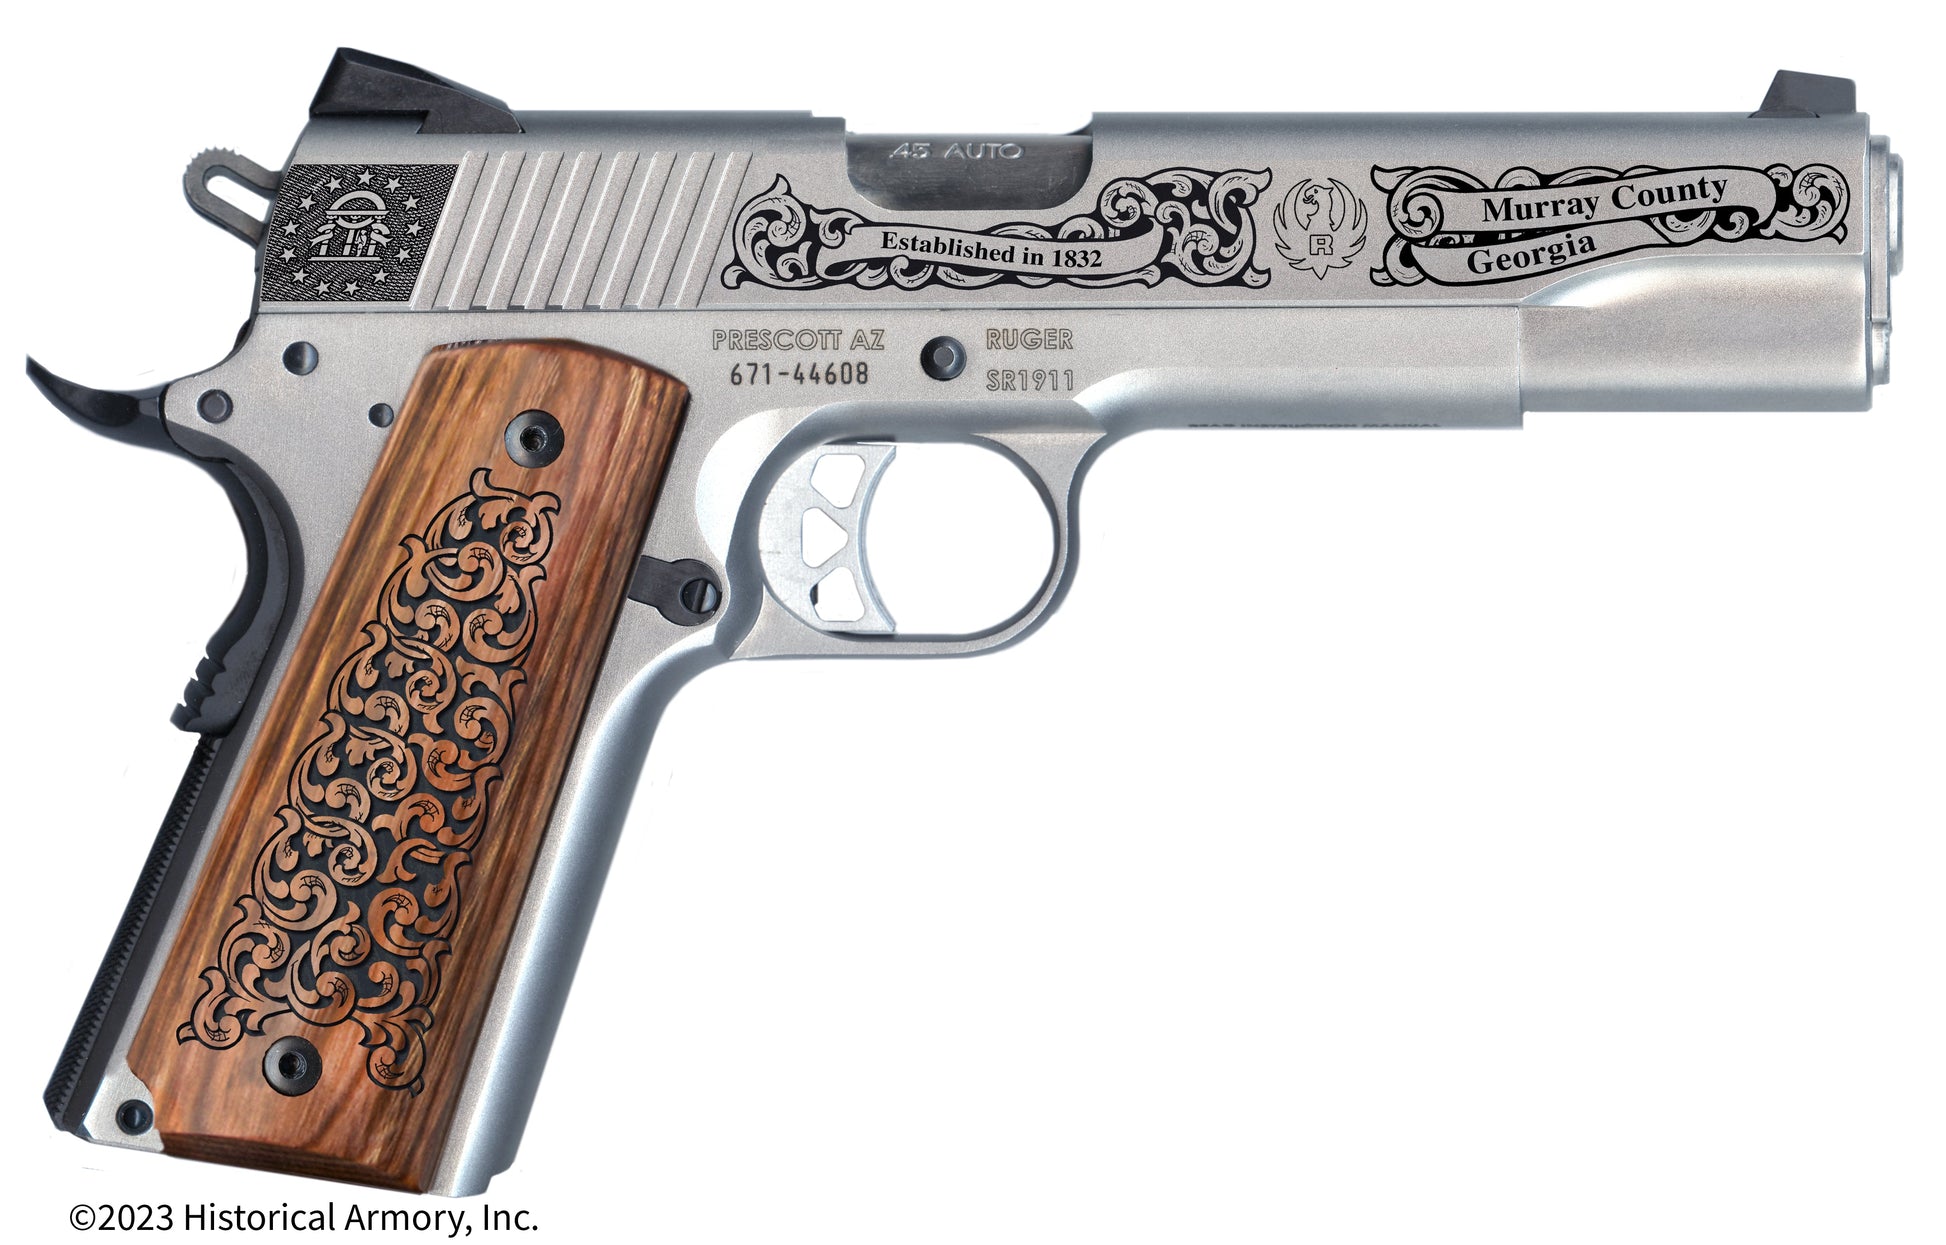 Murray County Georgia Engraved .45 Auto Ruger 1911